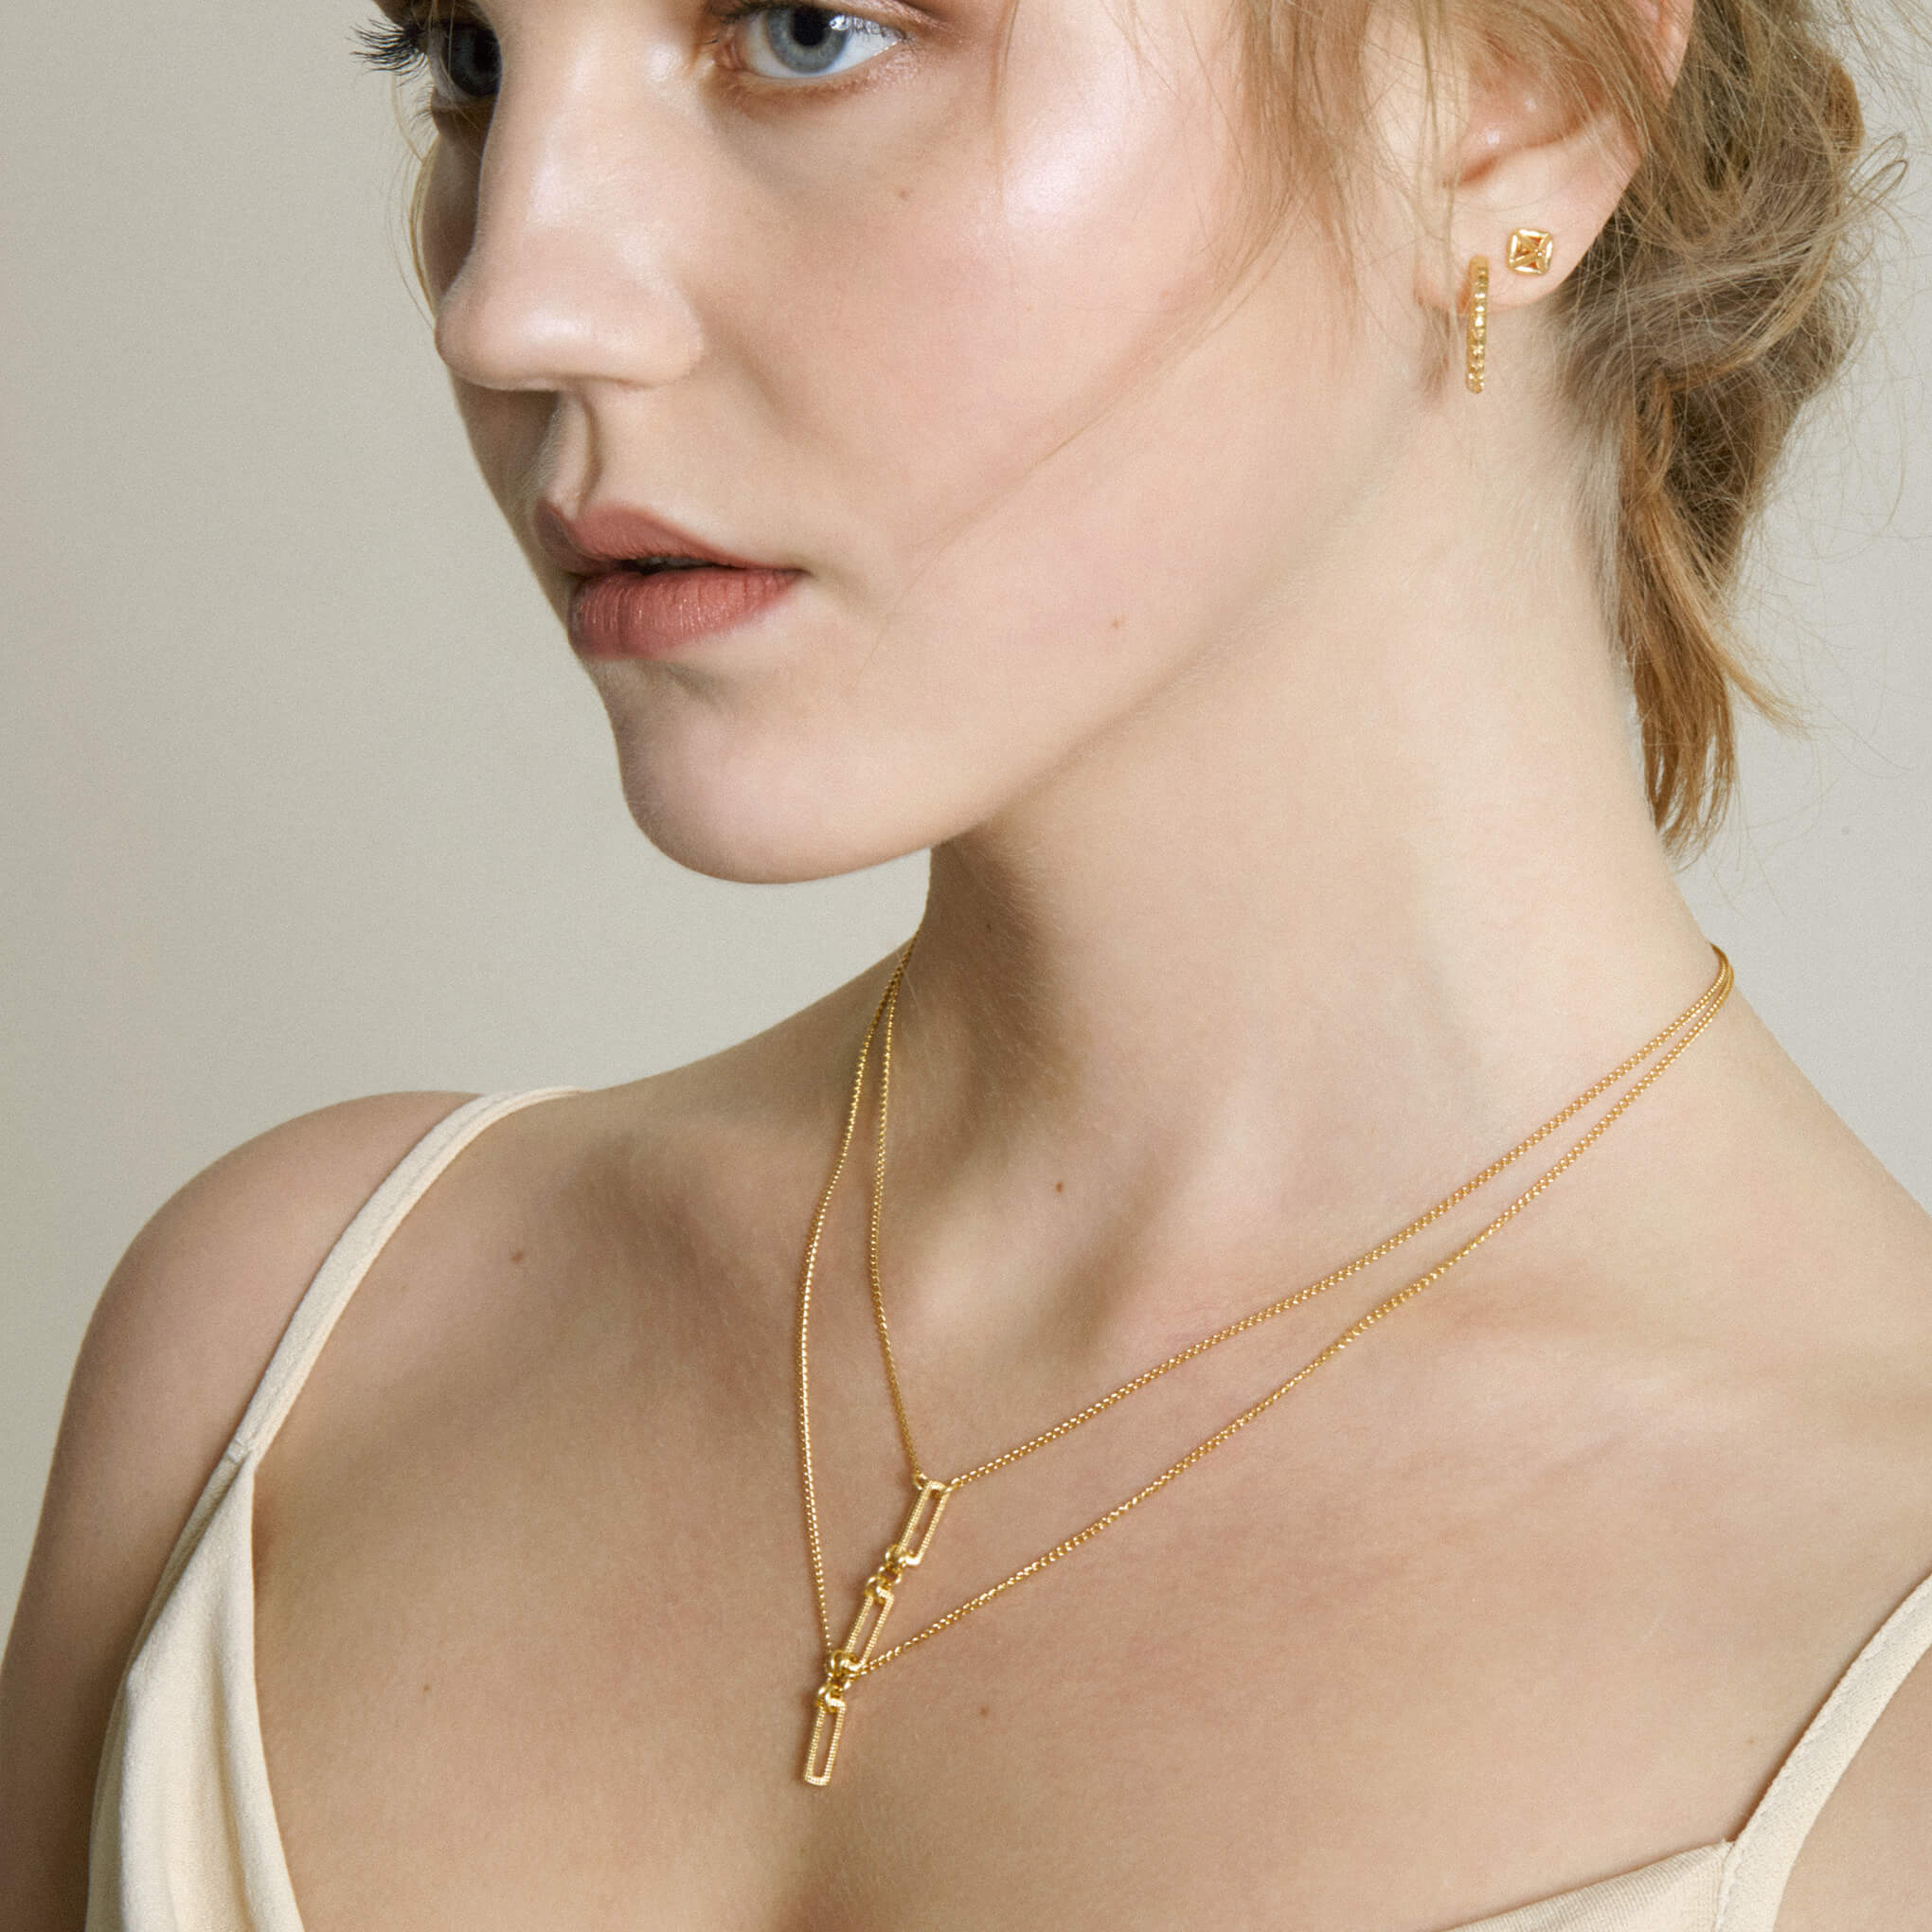 A lady wearing a selection of hoop and stud earrings and a necklace.